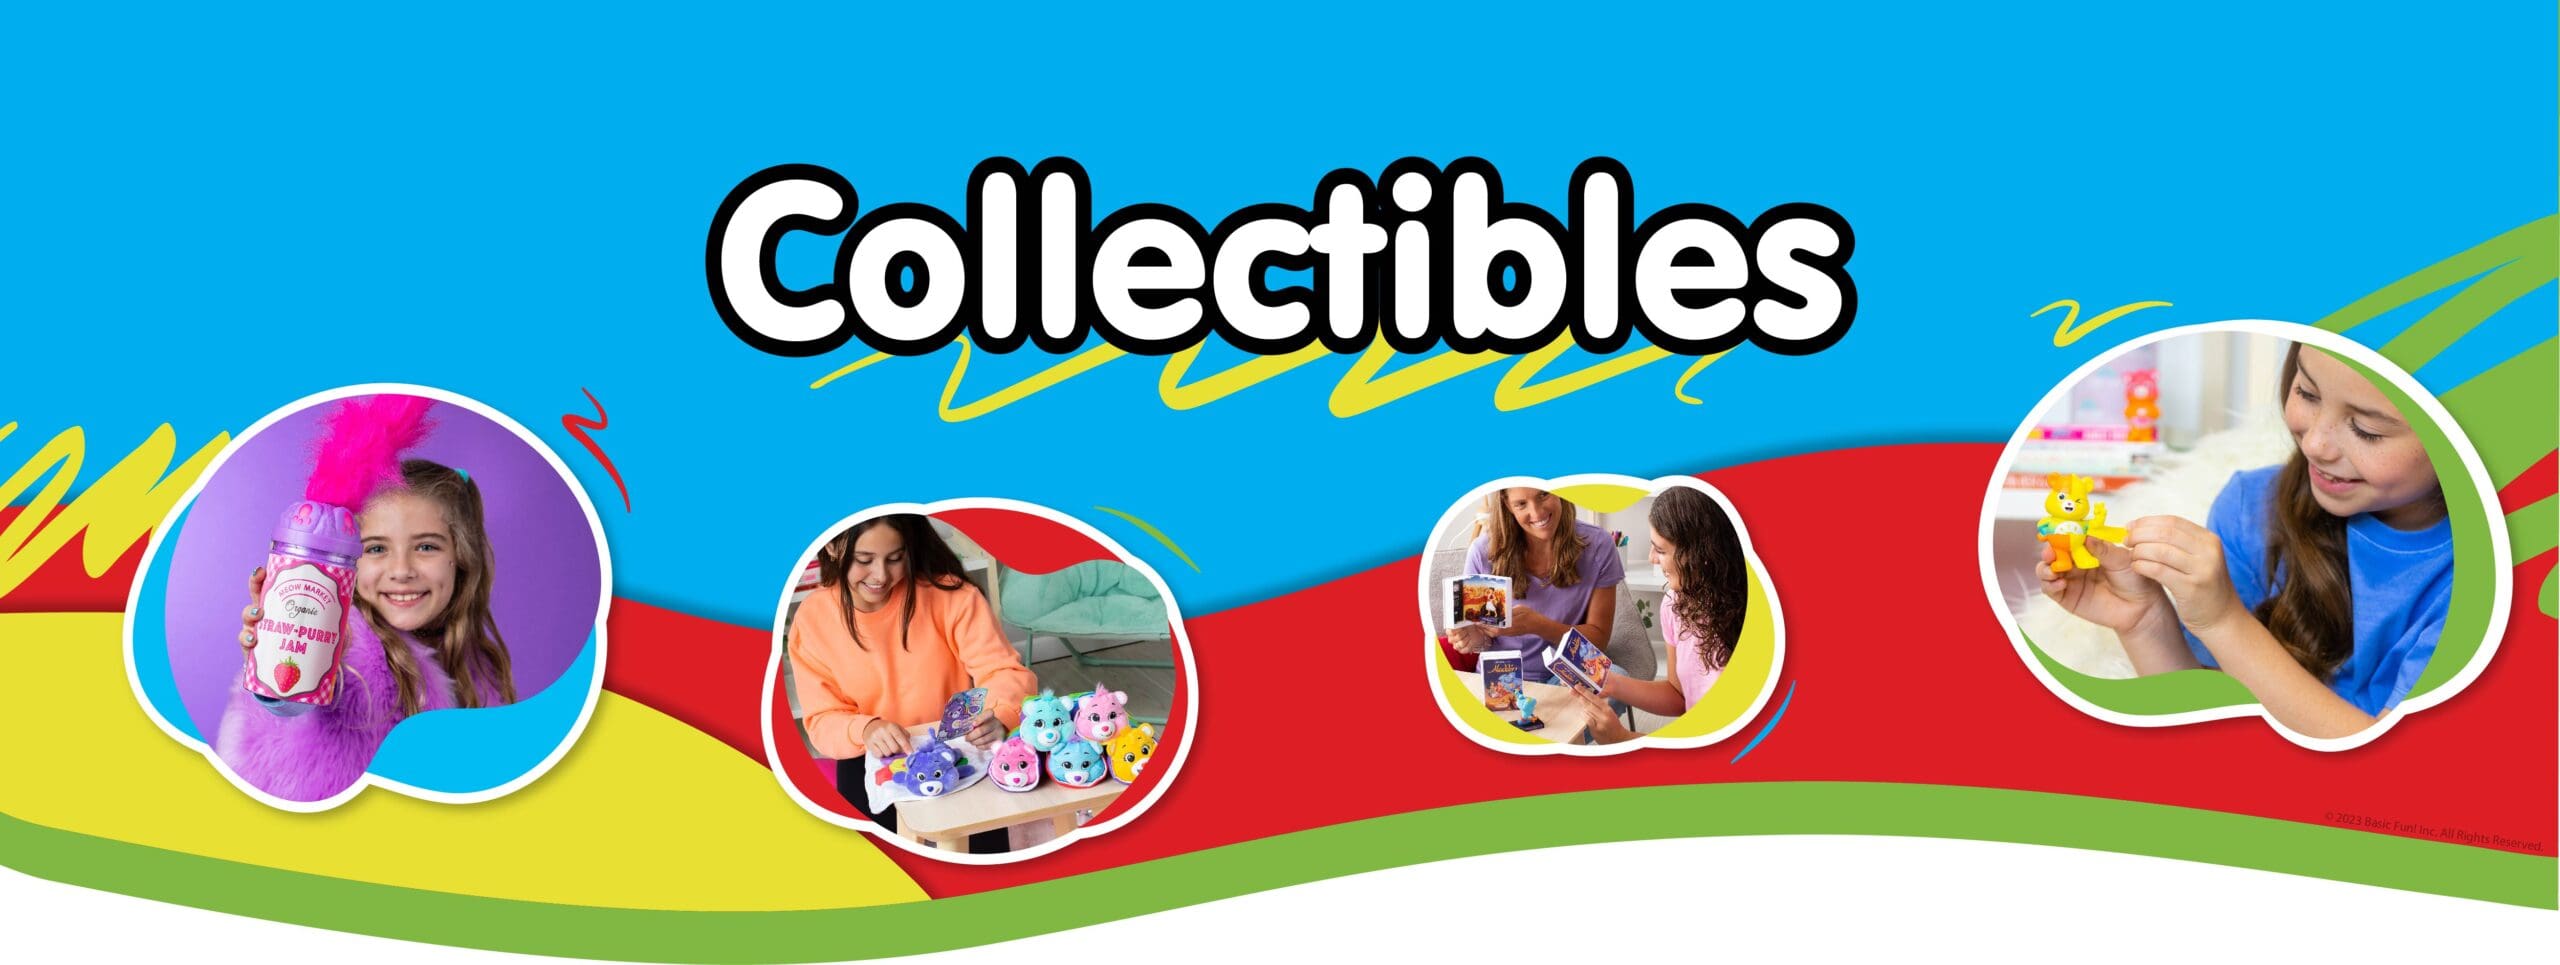 Collectibles Banner